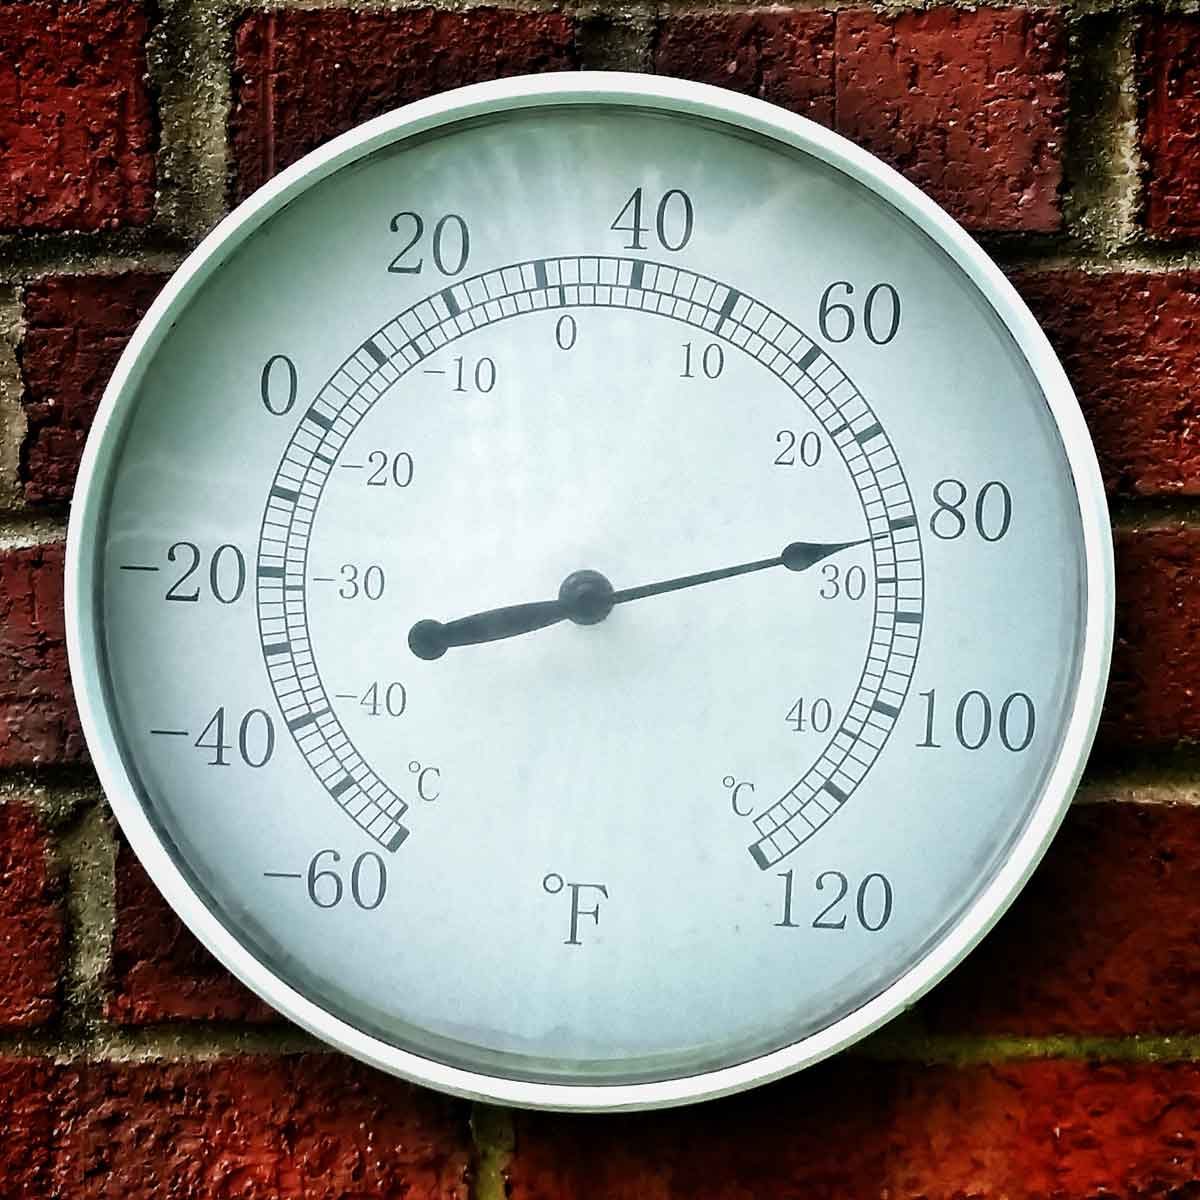 Thermometer showing 80 degrees